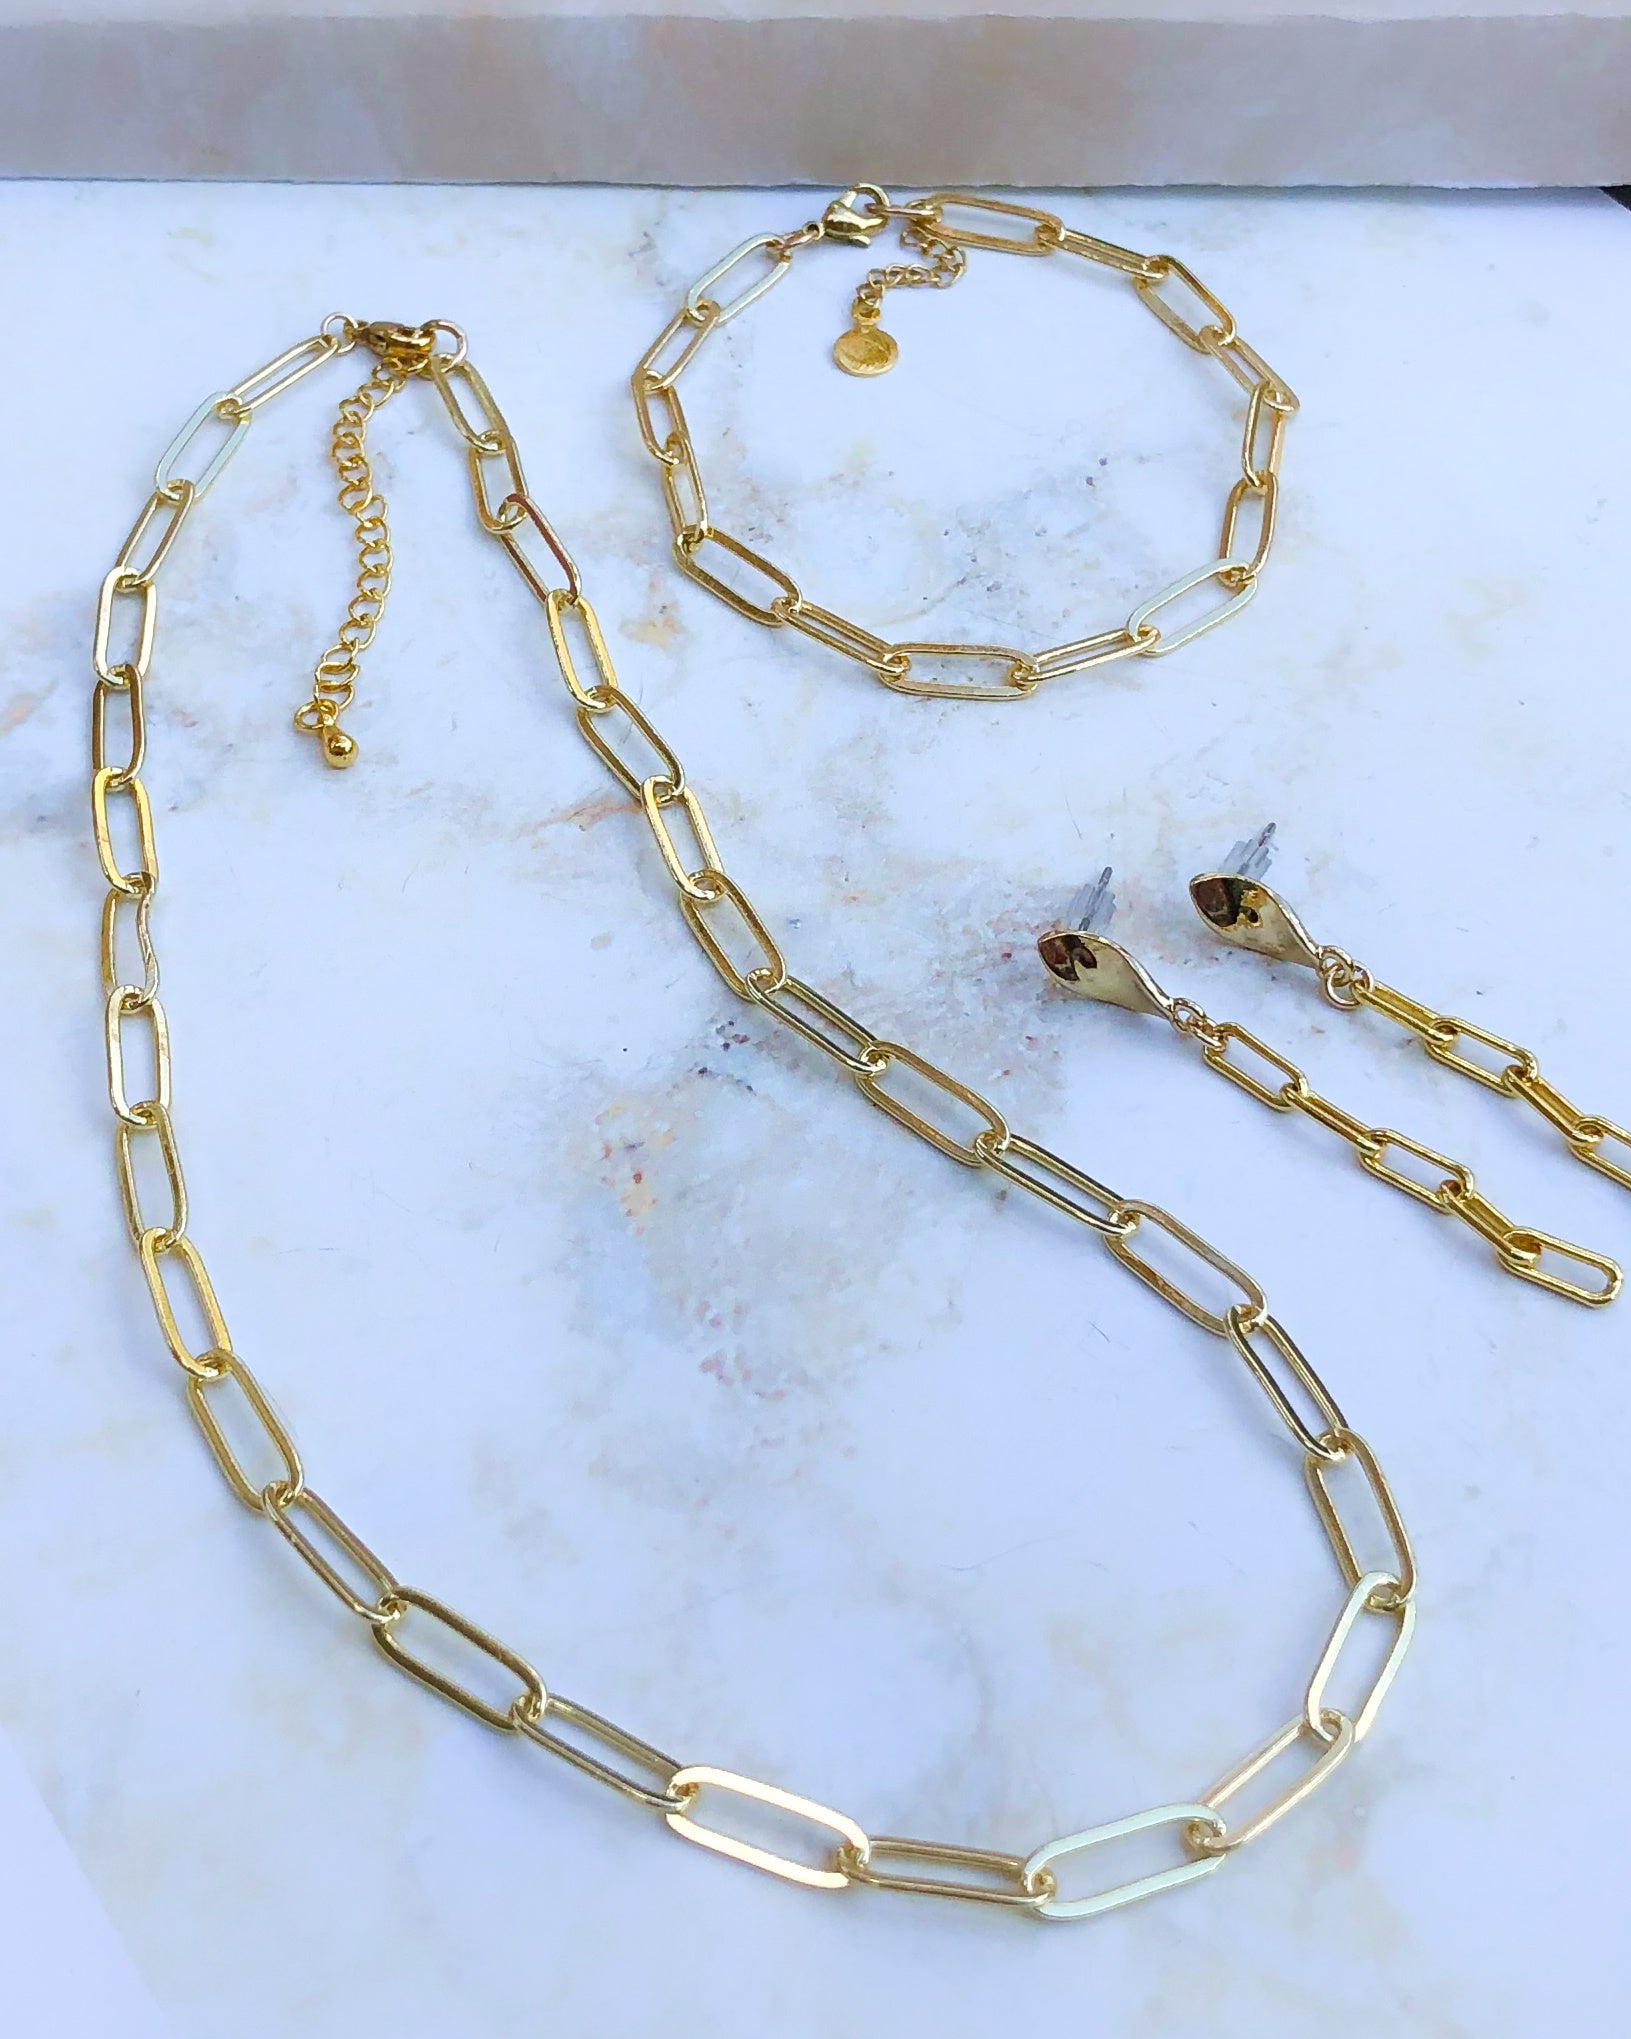 Paperclip Chain Necklace Set with 14k Gold Filled Chain